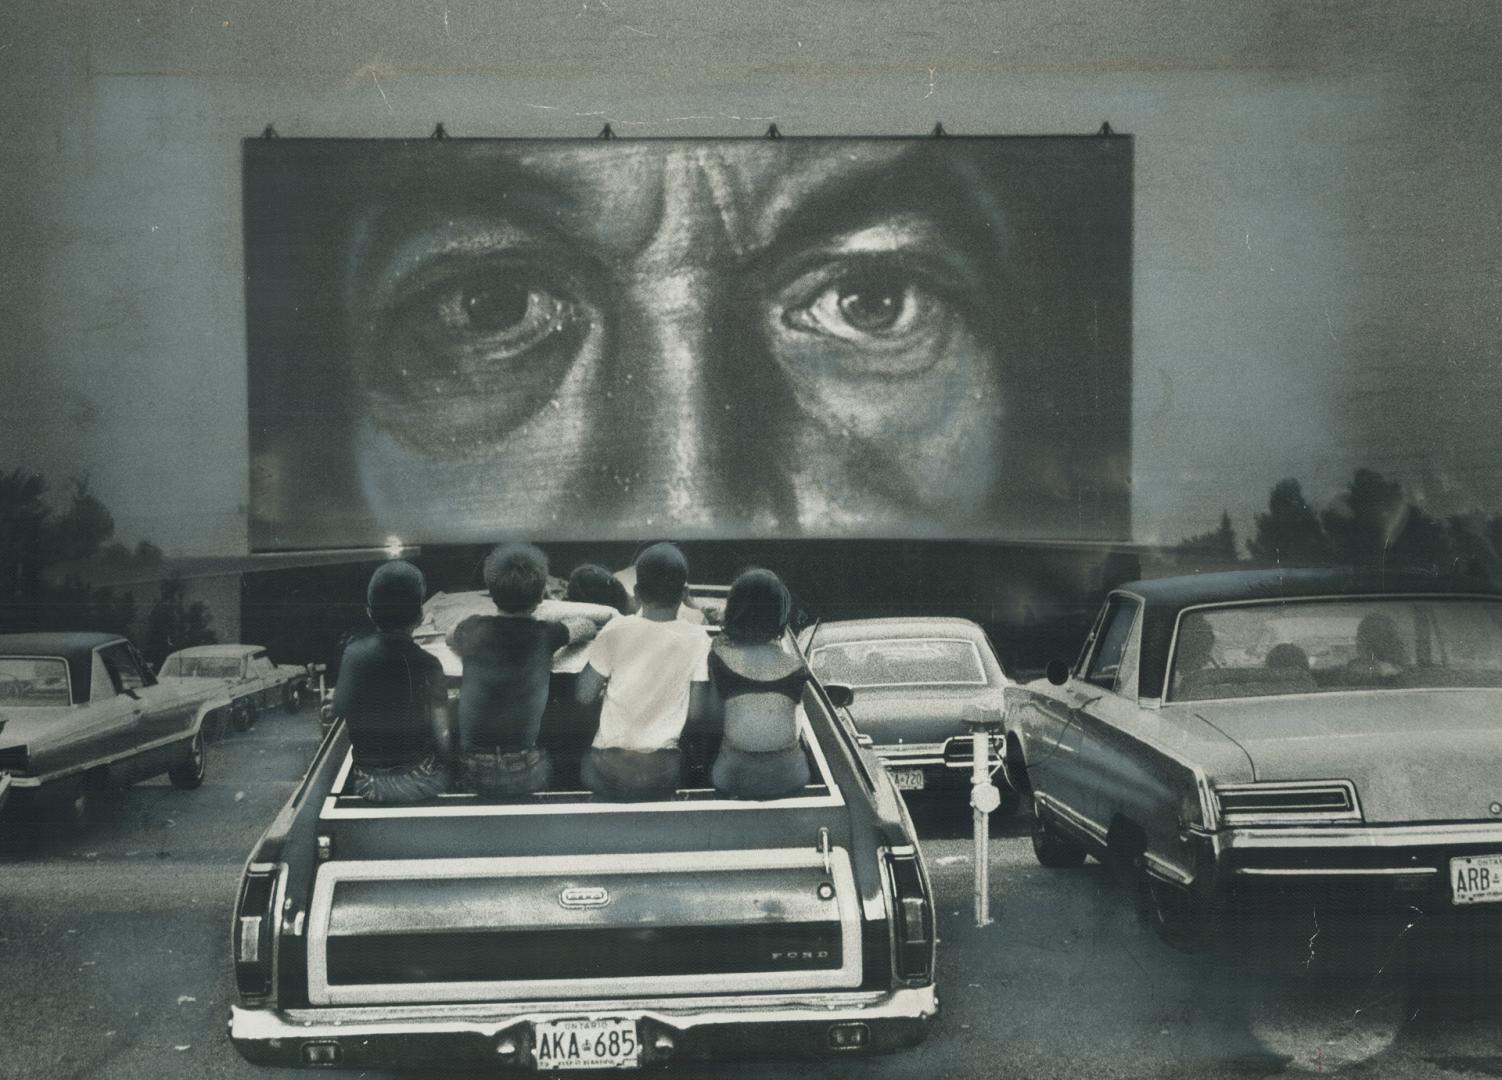 A Night out at the drive-in. These children watch from station wagon as parents take in a drive-in movie. Drive-ins are attracting family audiences, s(...)